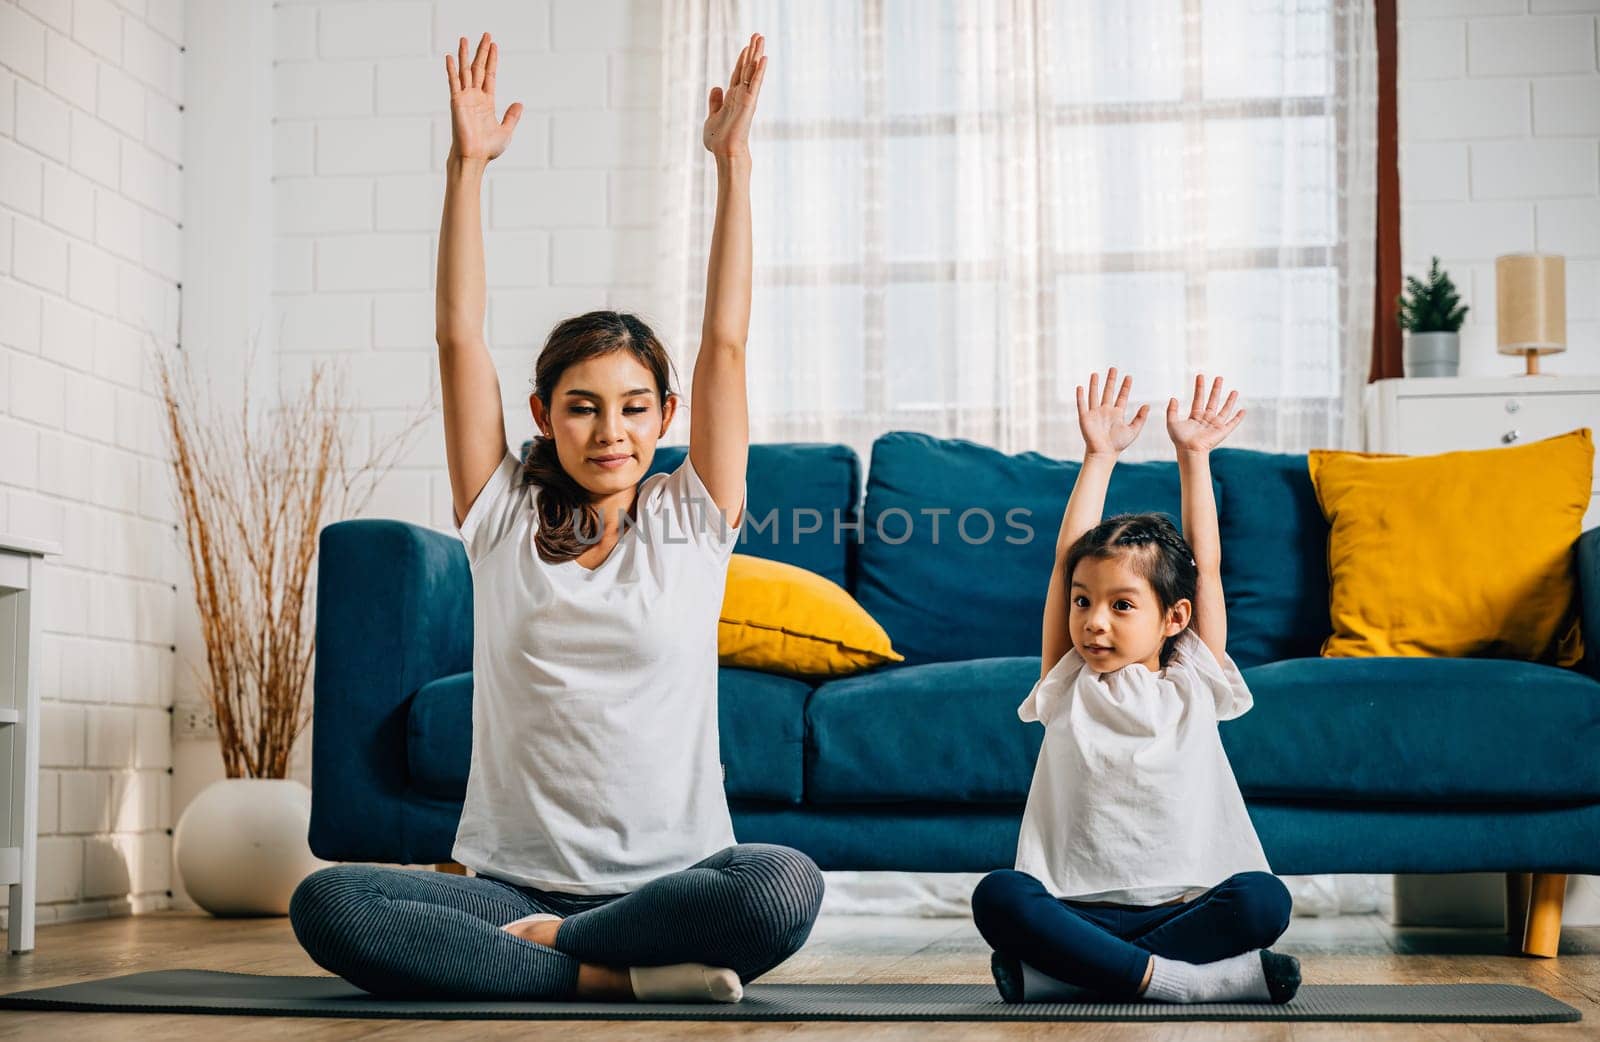 A beautiful young woman and her charming daughter share smiles during their family yoga session at home focusing on stretch and balance creating a harmonious and joyful moment.